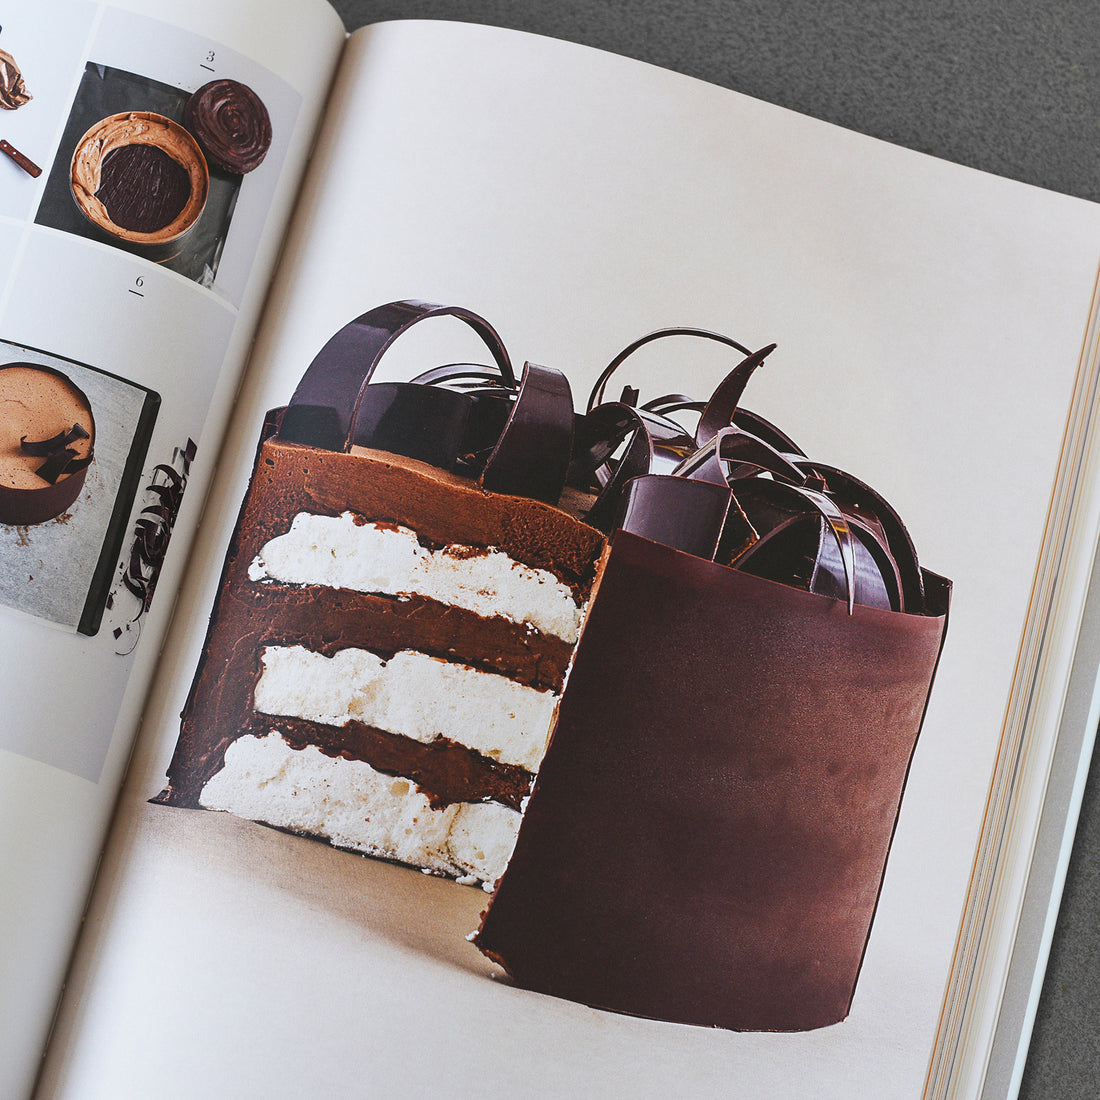 The Ultimate Book of Chocolate Make Your Chocolate Dreams Become a Reality